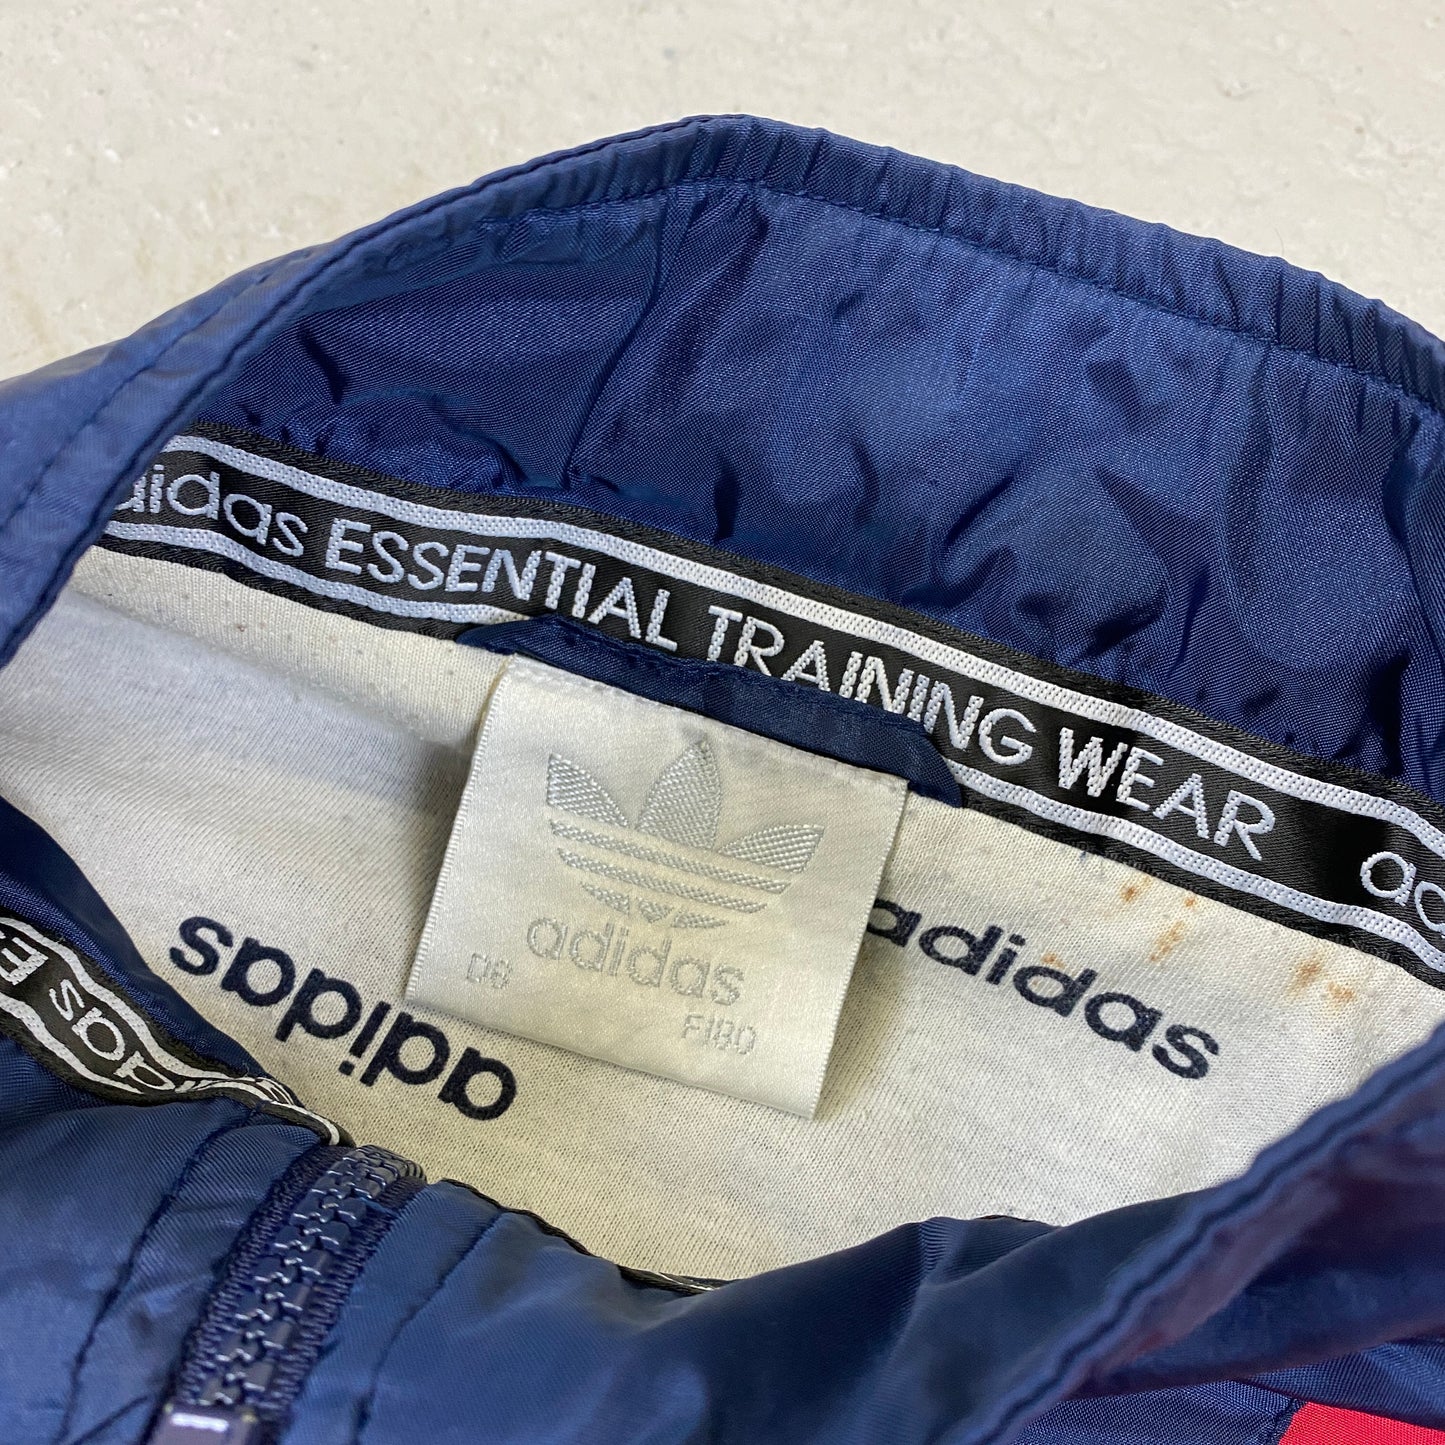 Adidas RARE embroidered track jacket (L)